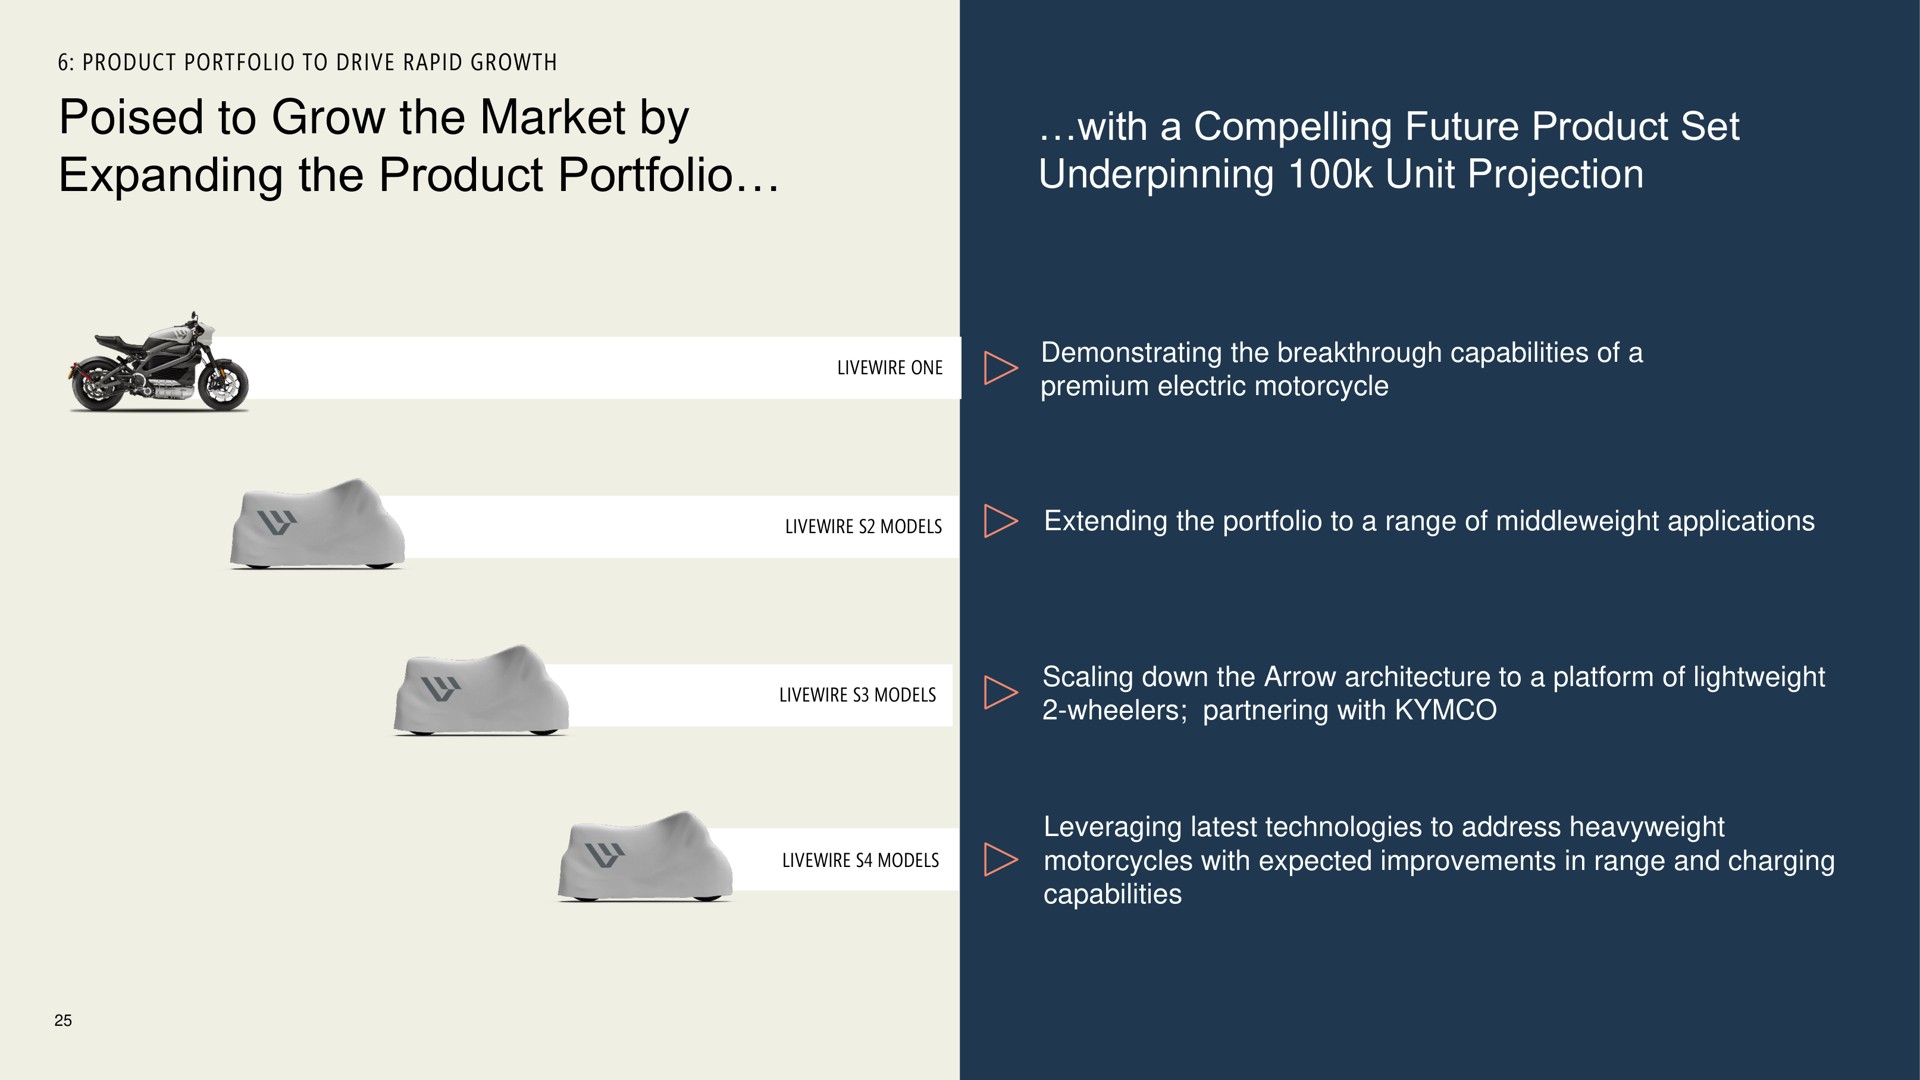 poised to grow the market by expanding the product portfolio with a compelling future product set underpinning unit projection | Harley Davidson